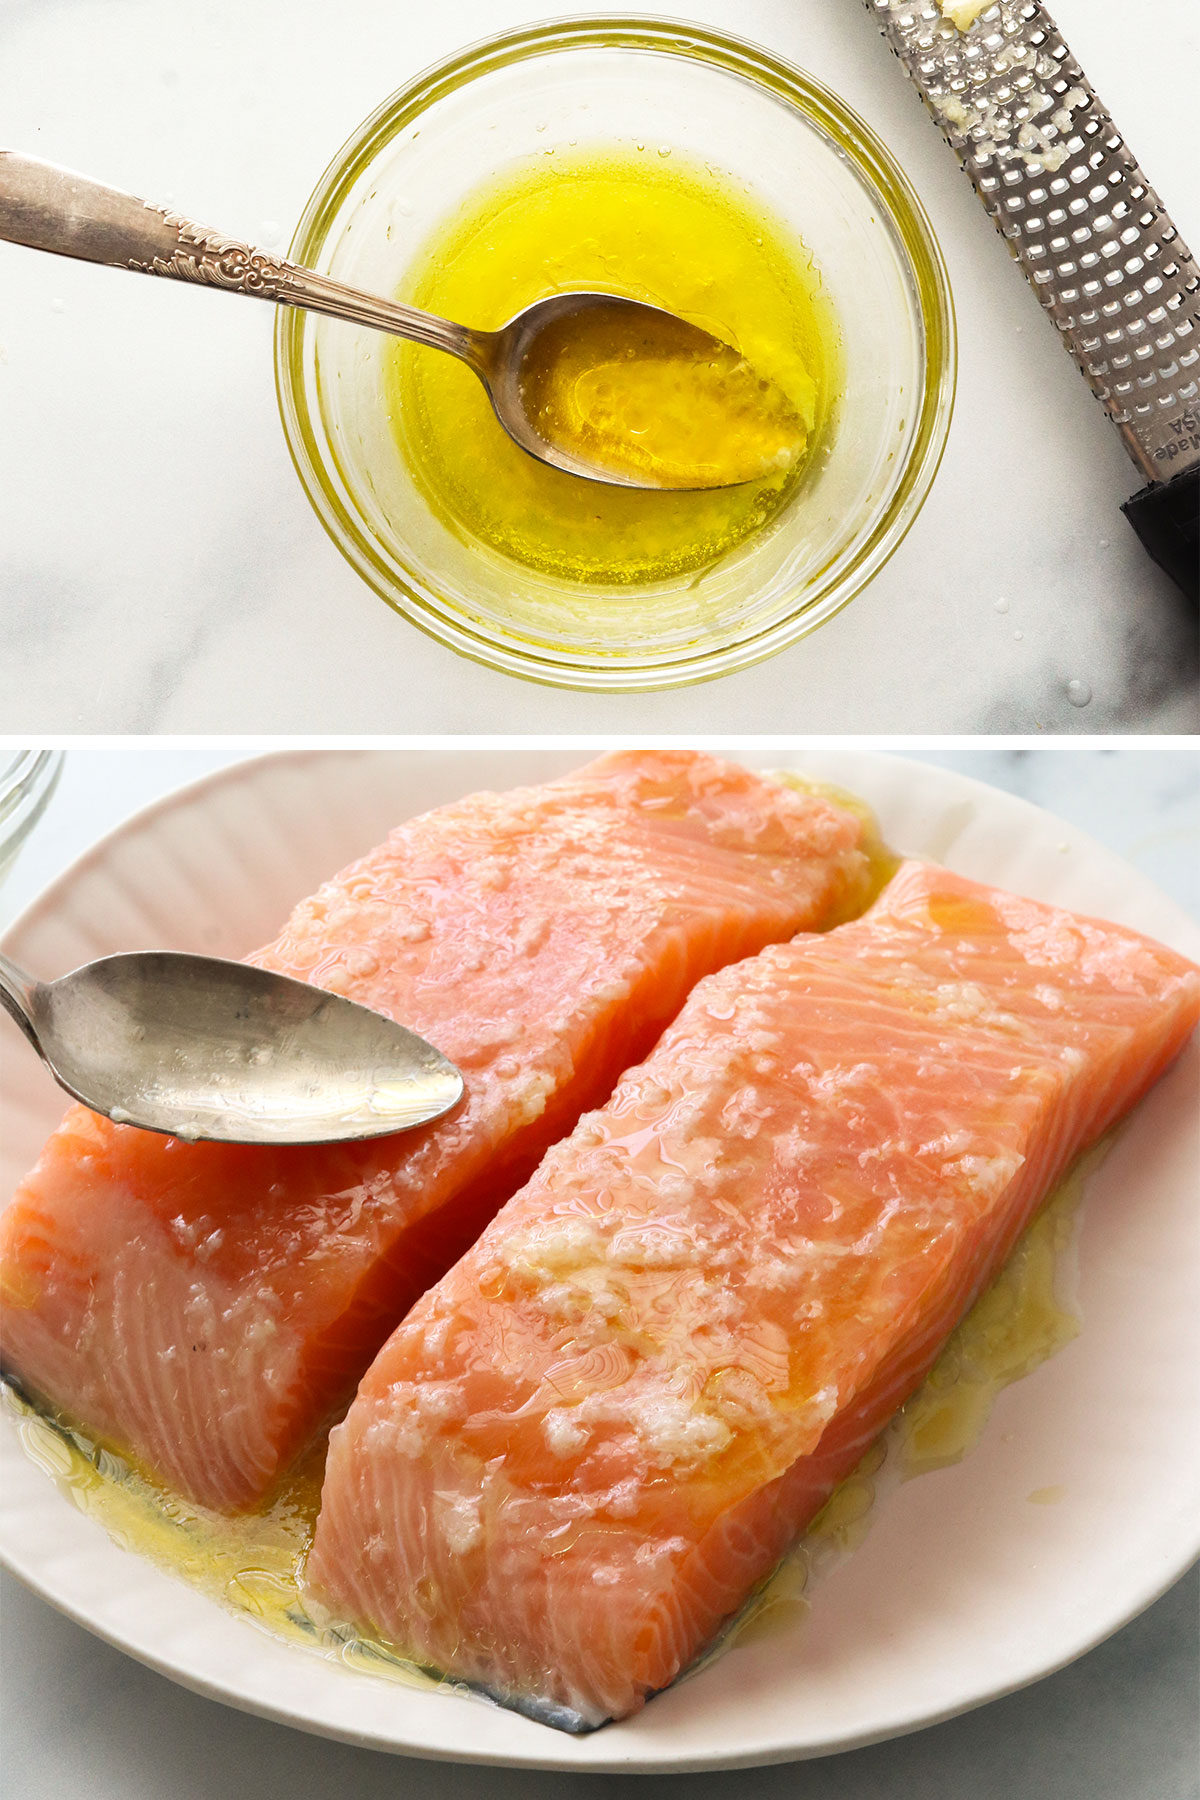 lemon juice mixed with garlic and olive oil in a bowl and spread over salmon.